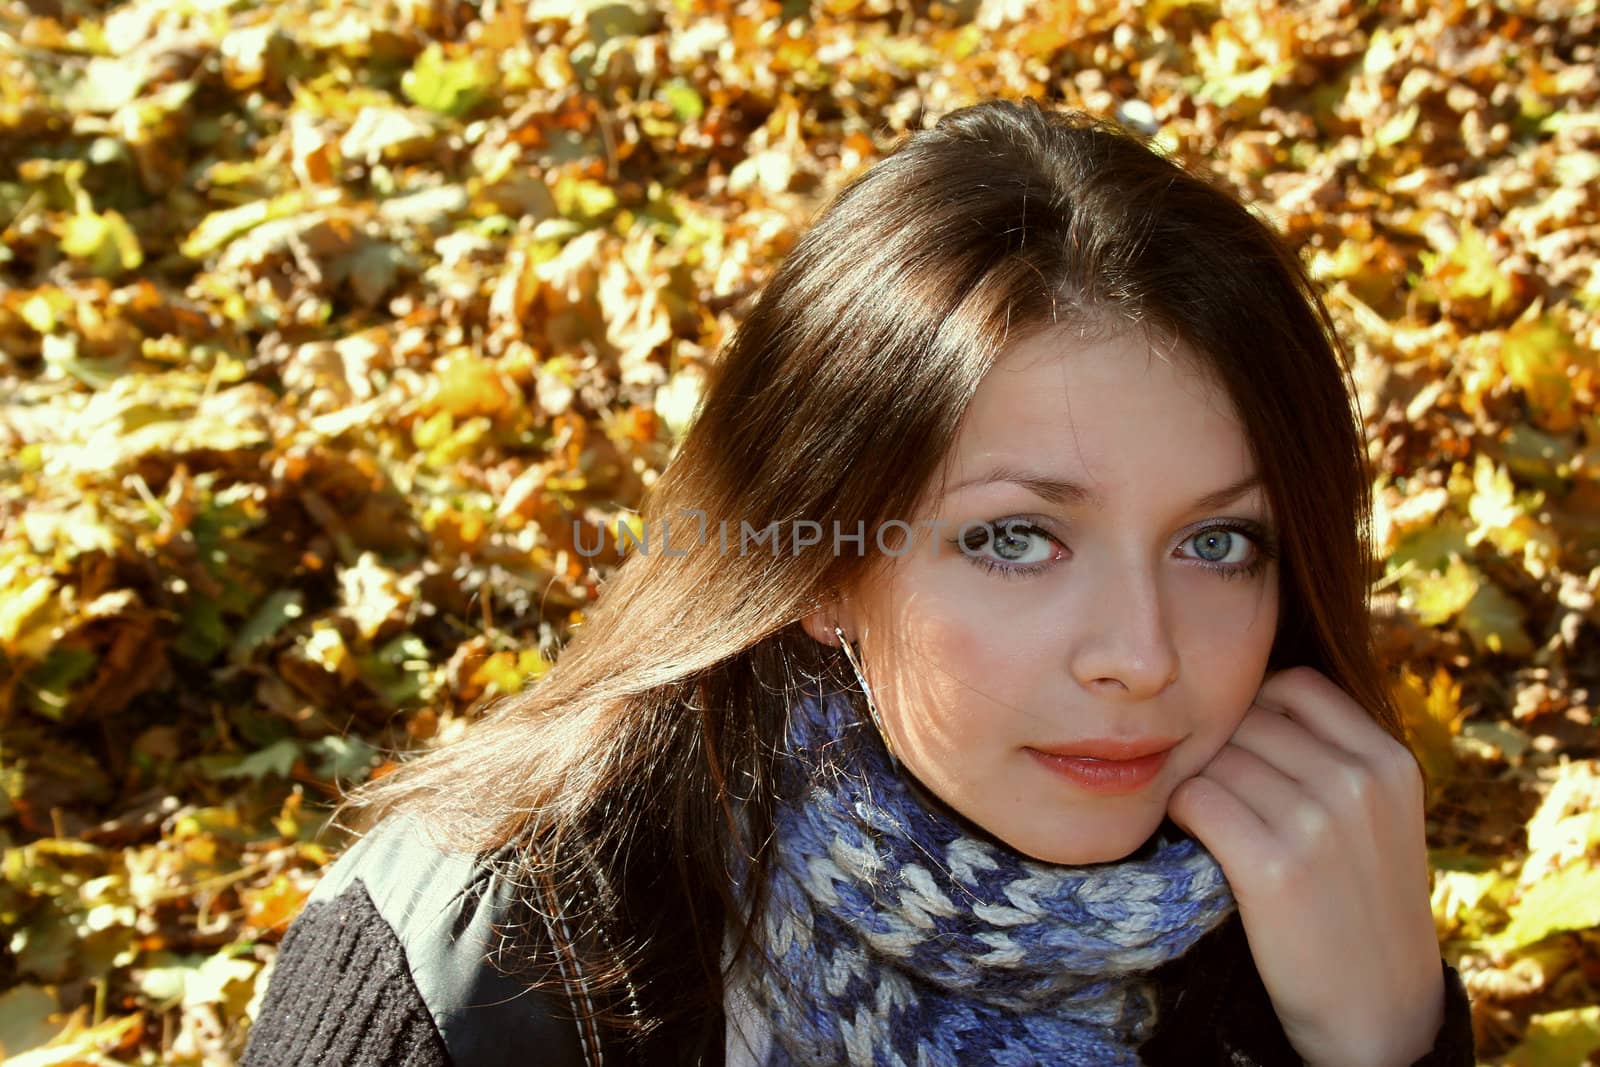 beautiful girl on autumn leaves background